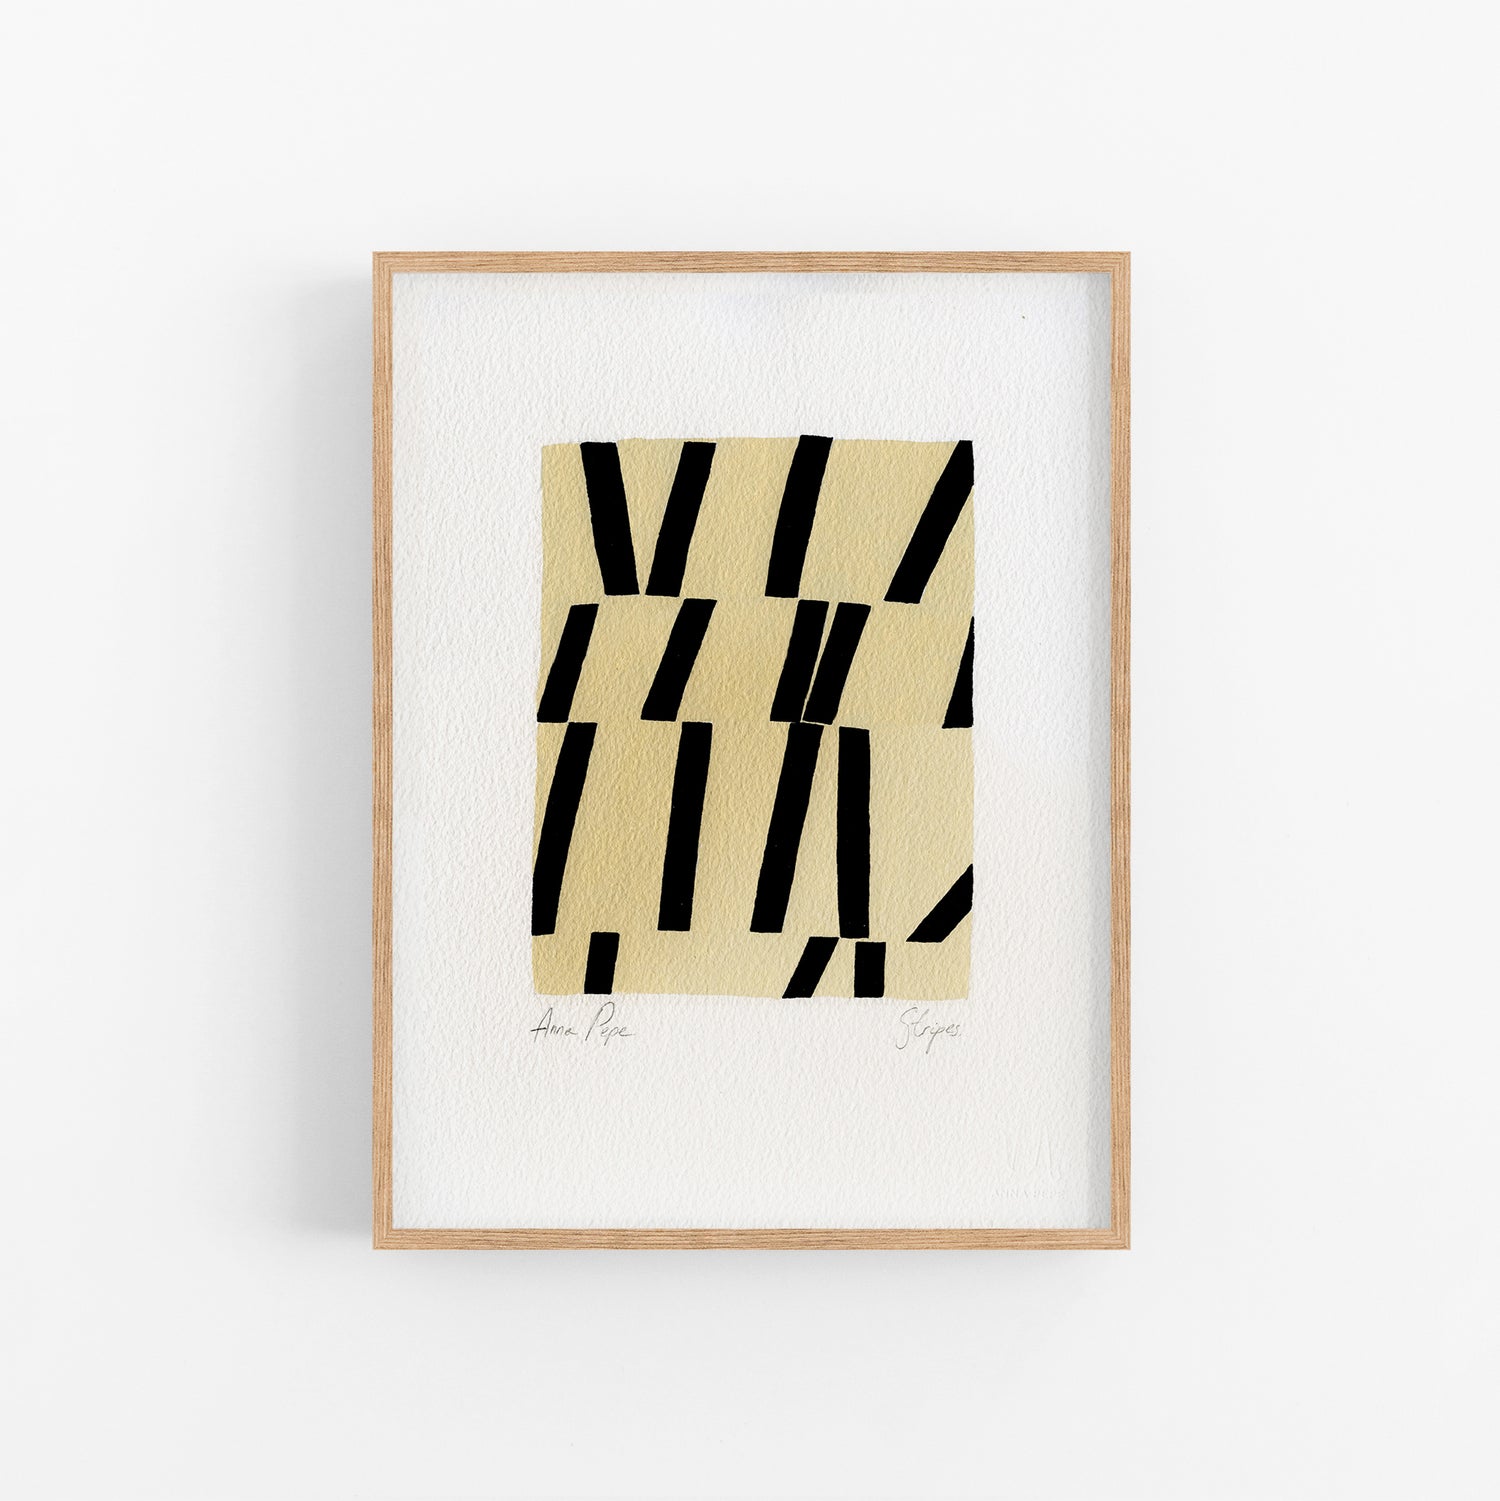 Stripes. 03 - Gouache painting on paper Anna Pepe x forn Studio